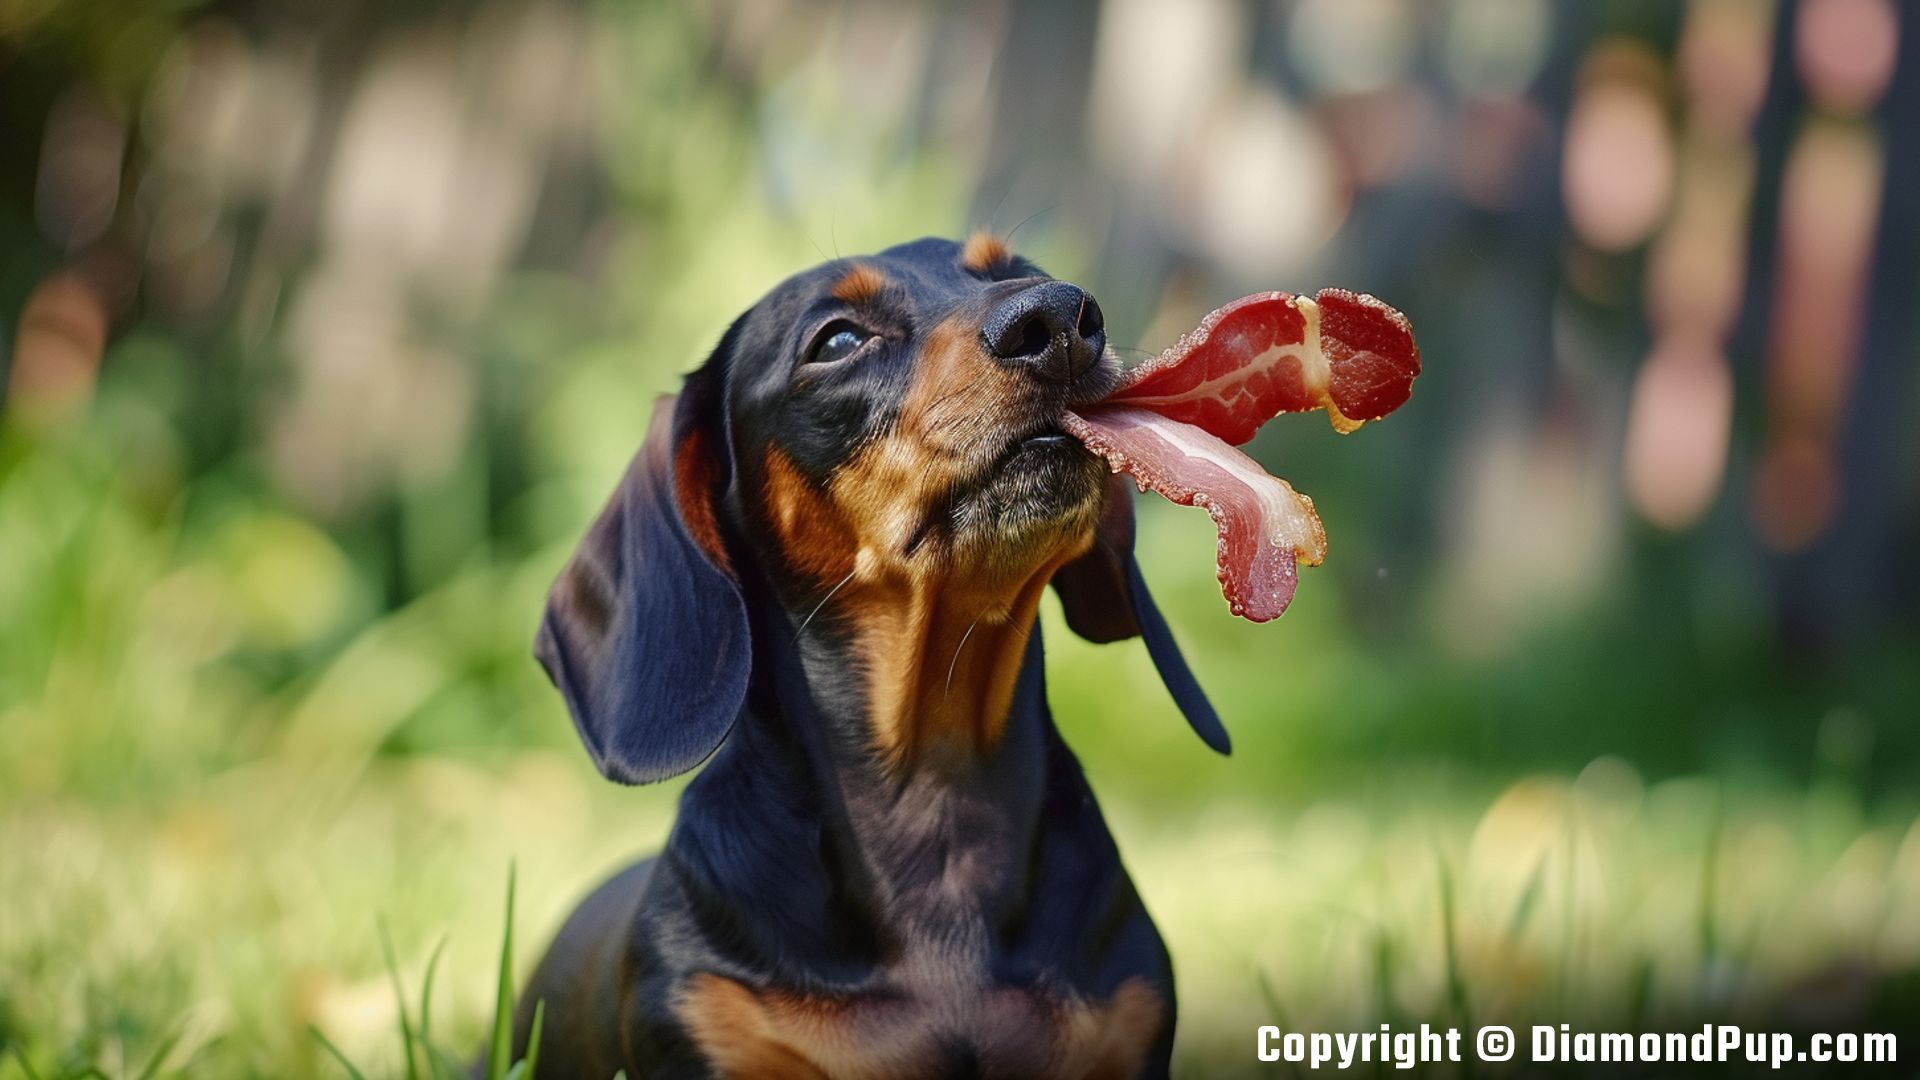 Photograph of a Cute Dachshund Snacking on Bacon